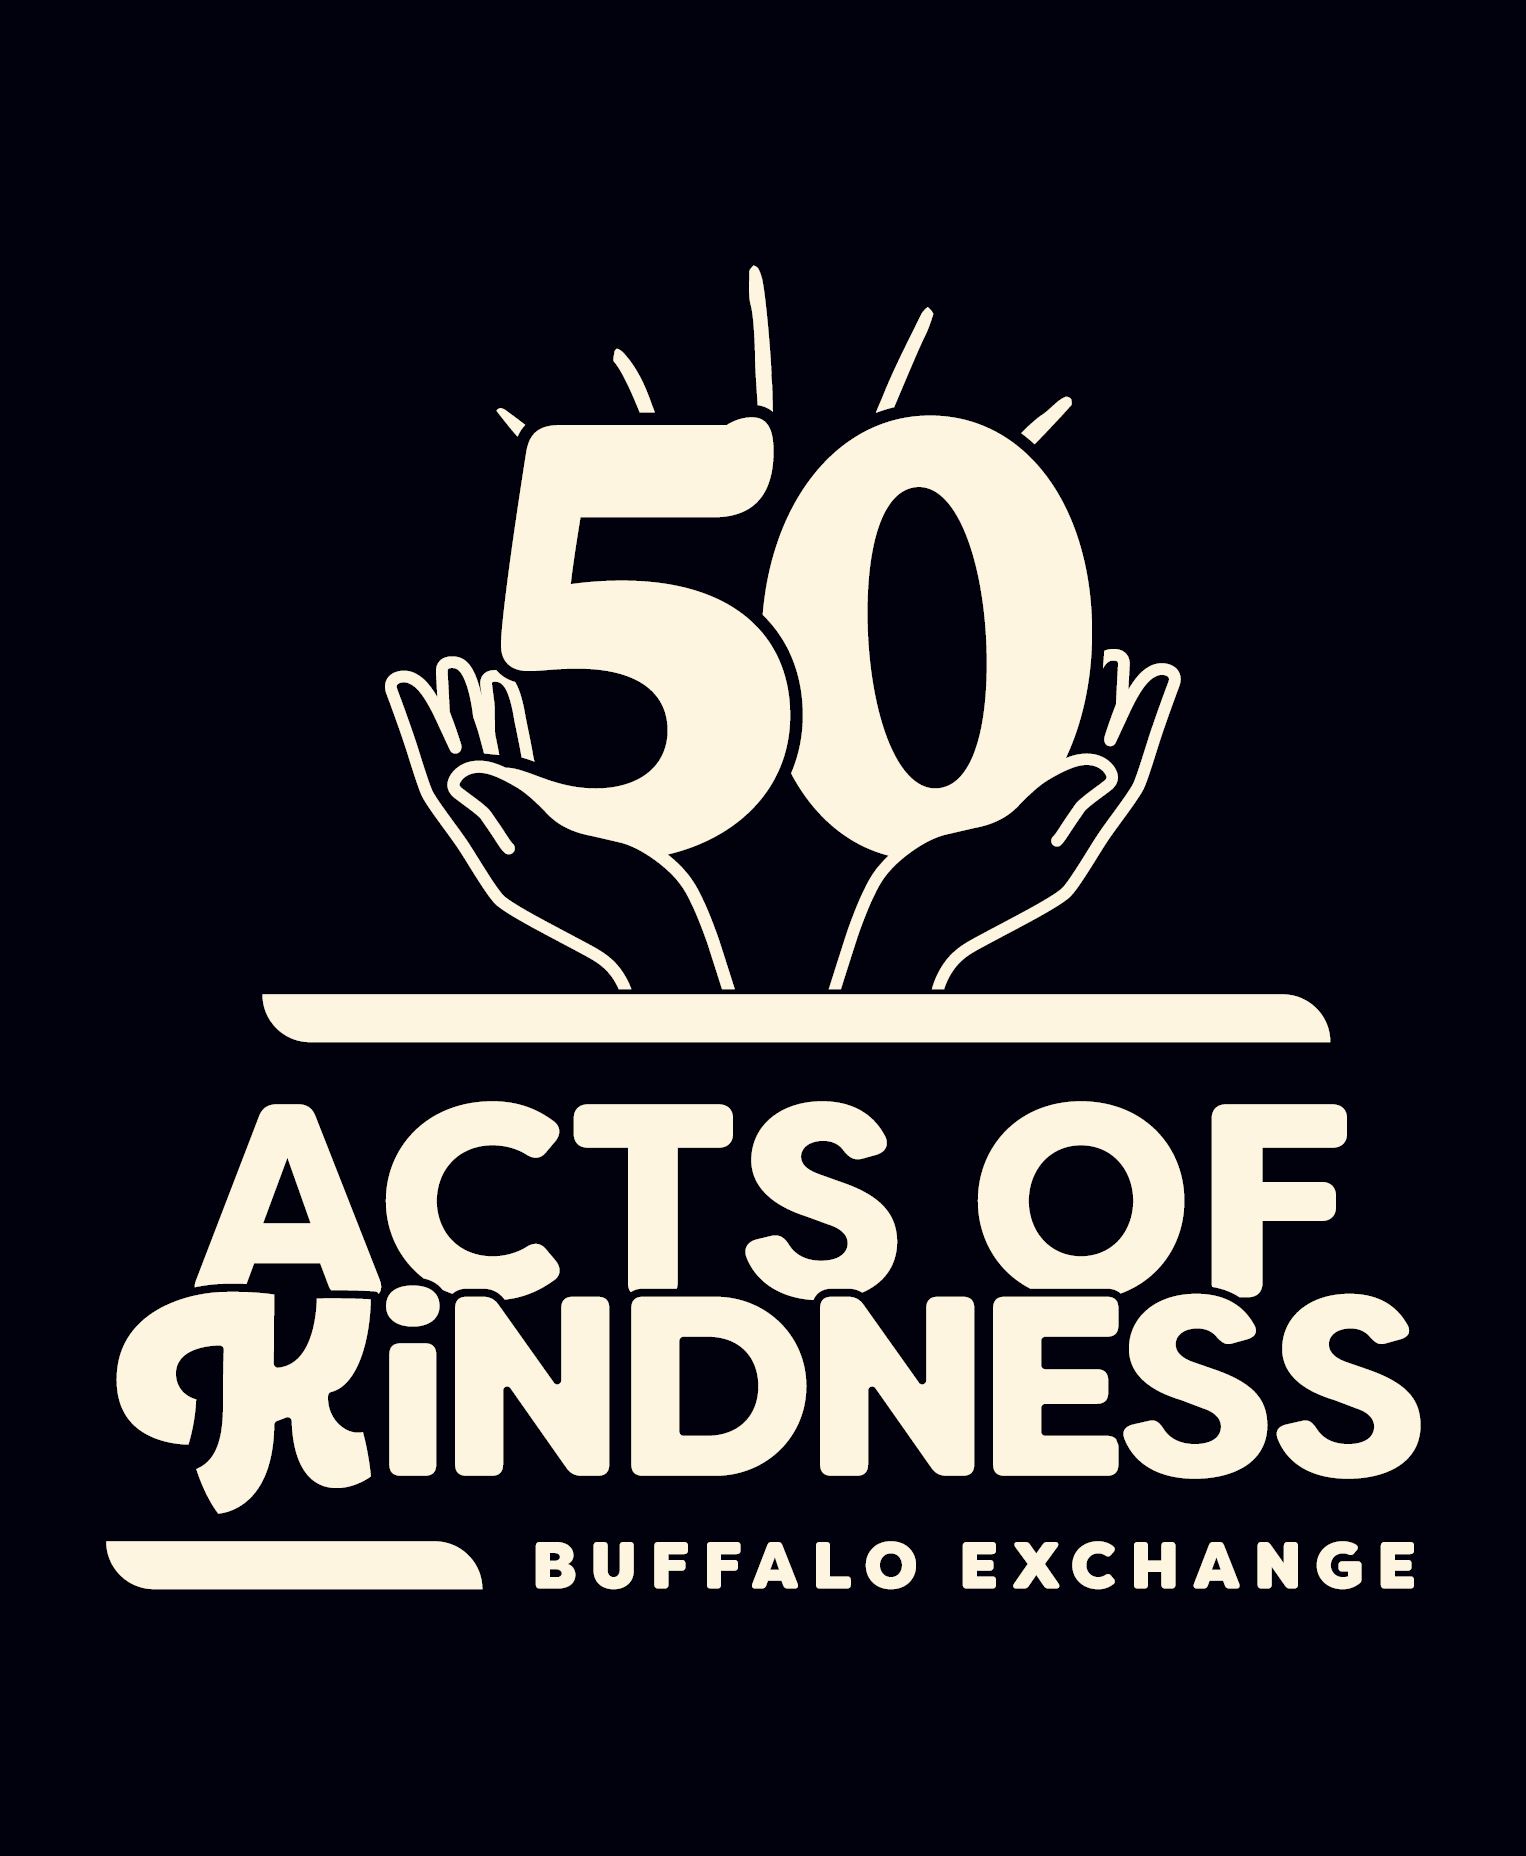 50 Acts of Kindness - Buffalo Exchange logo with helping hands graphic